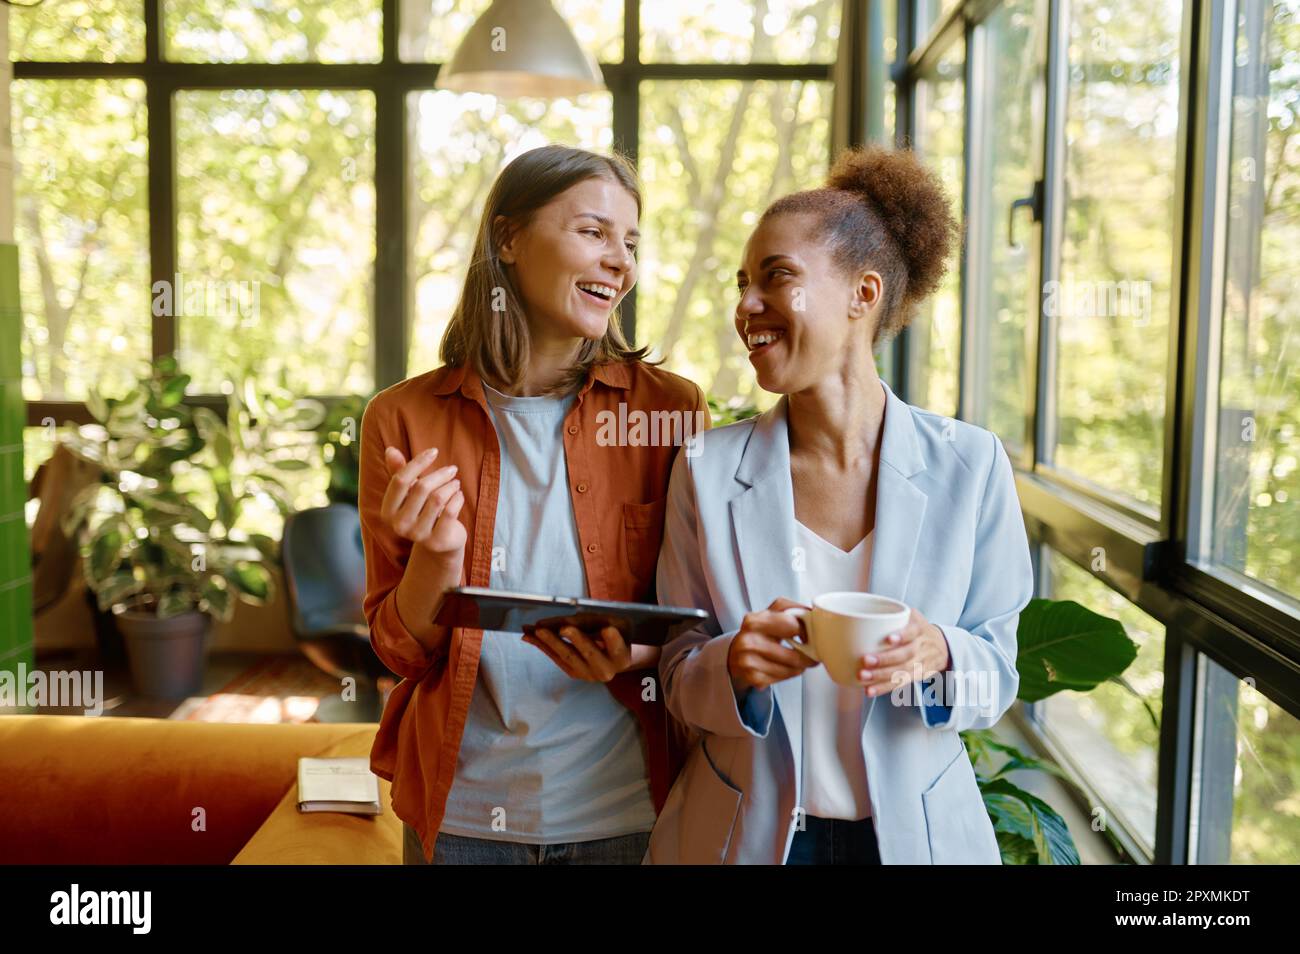 Happy cheerful coworkers chatting and laughing at workplace. Two female employees enjoying teamwork in modern coworking space Stock Photo